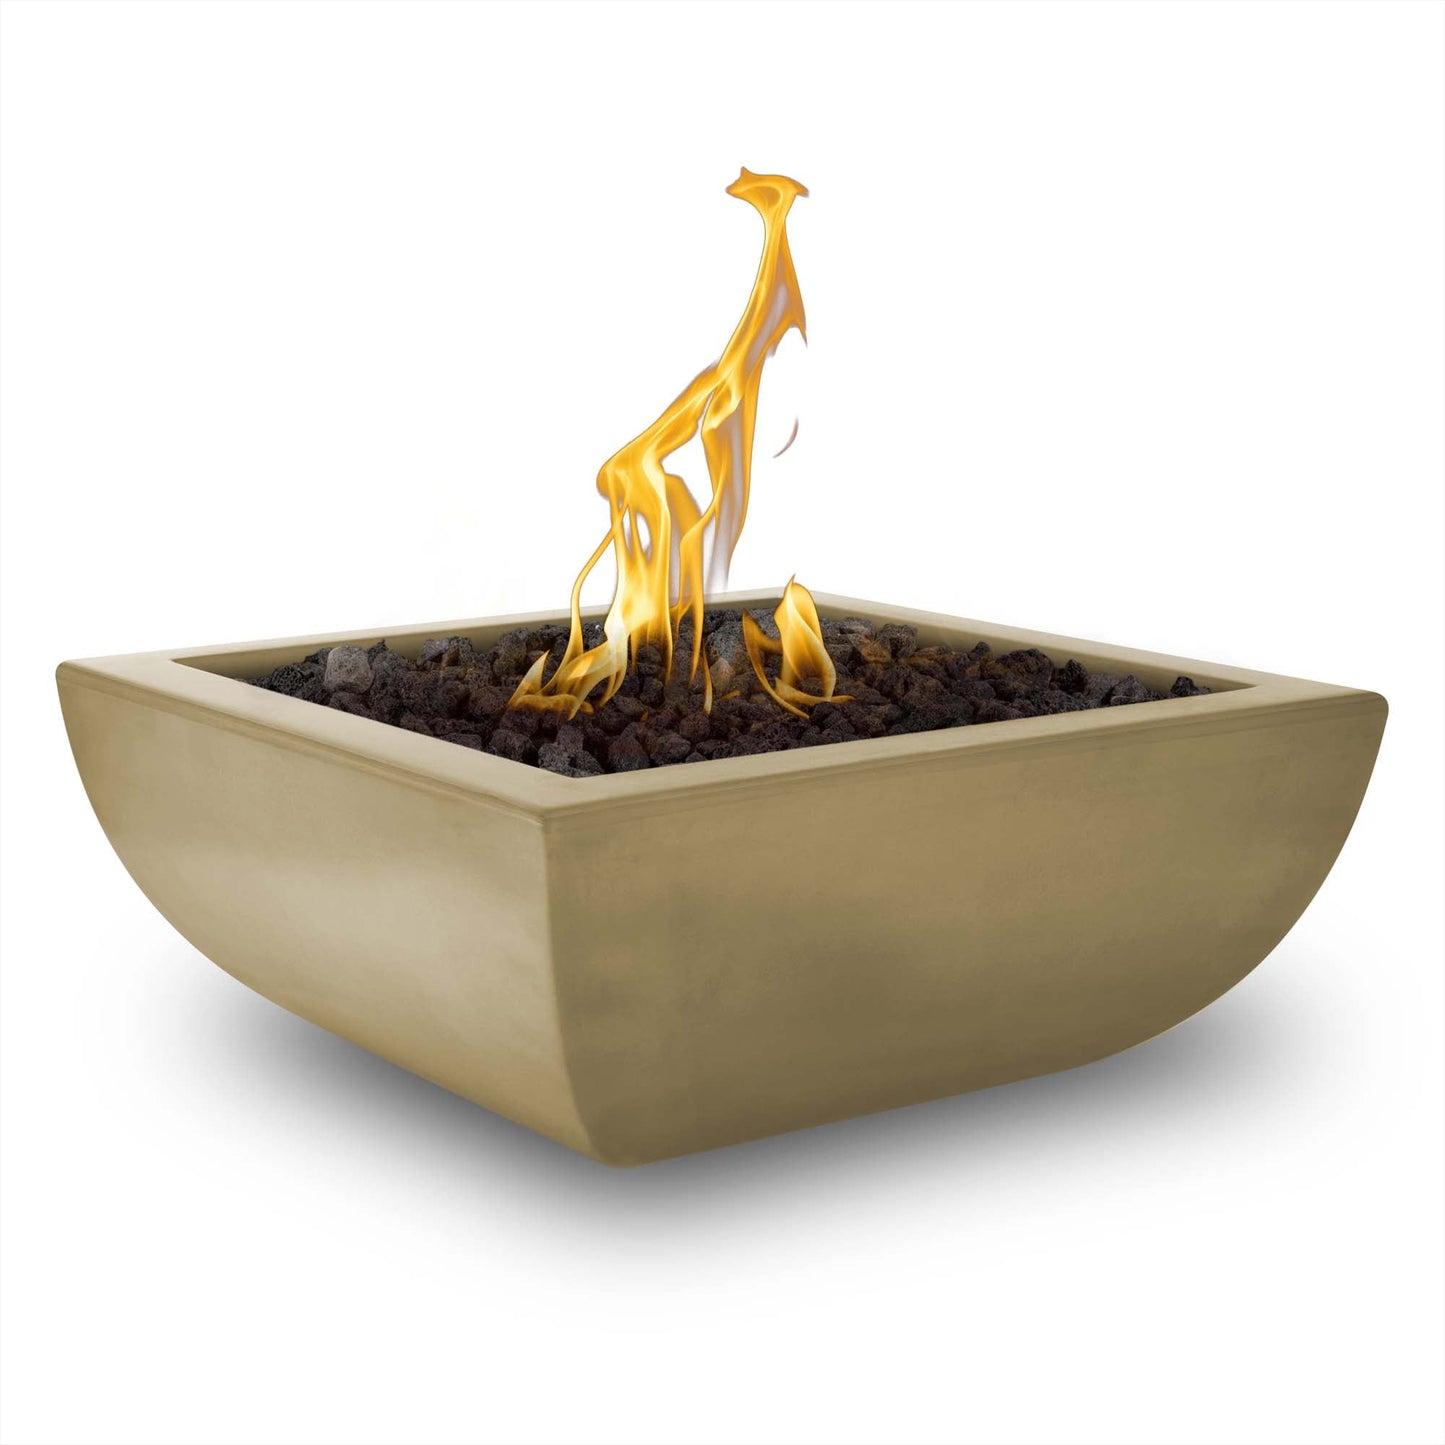 The Outdoor Plus Square Avalon 30" Metallic Bronze GFRC Concrete Natural Gas Fire Bowl with Match Lit with Flame Sense Ignition